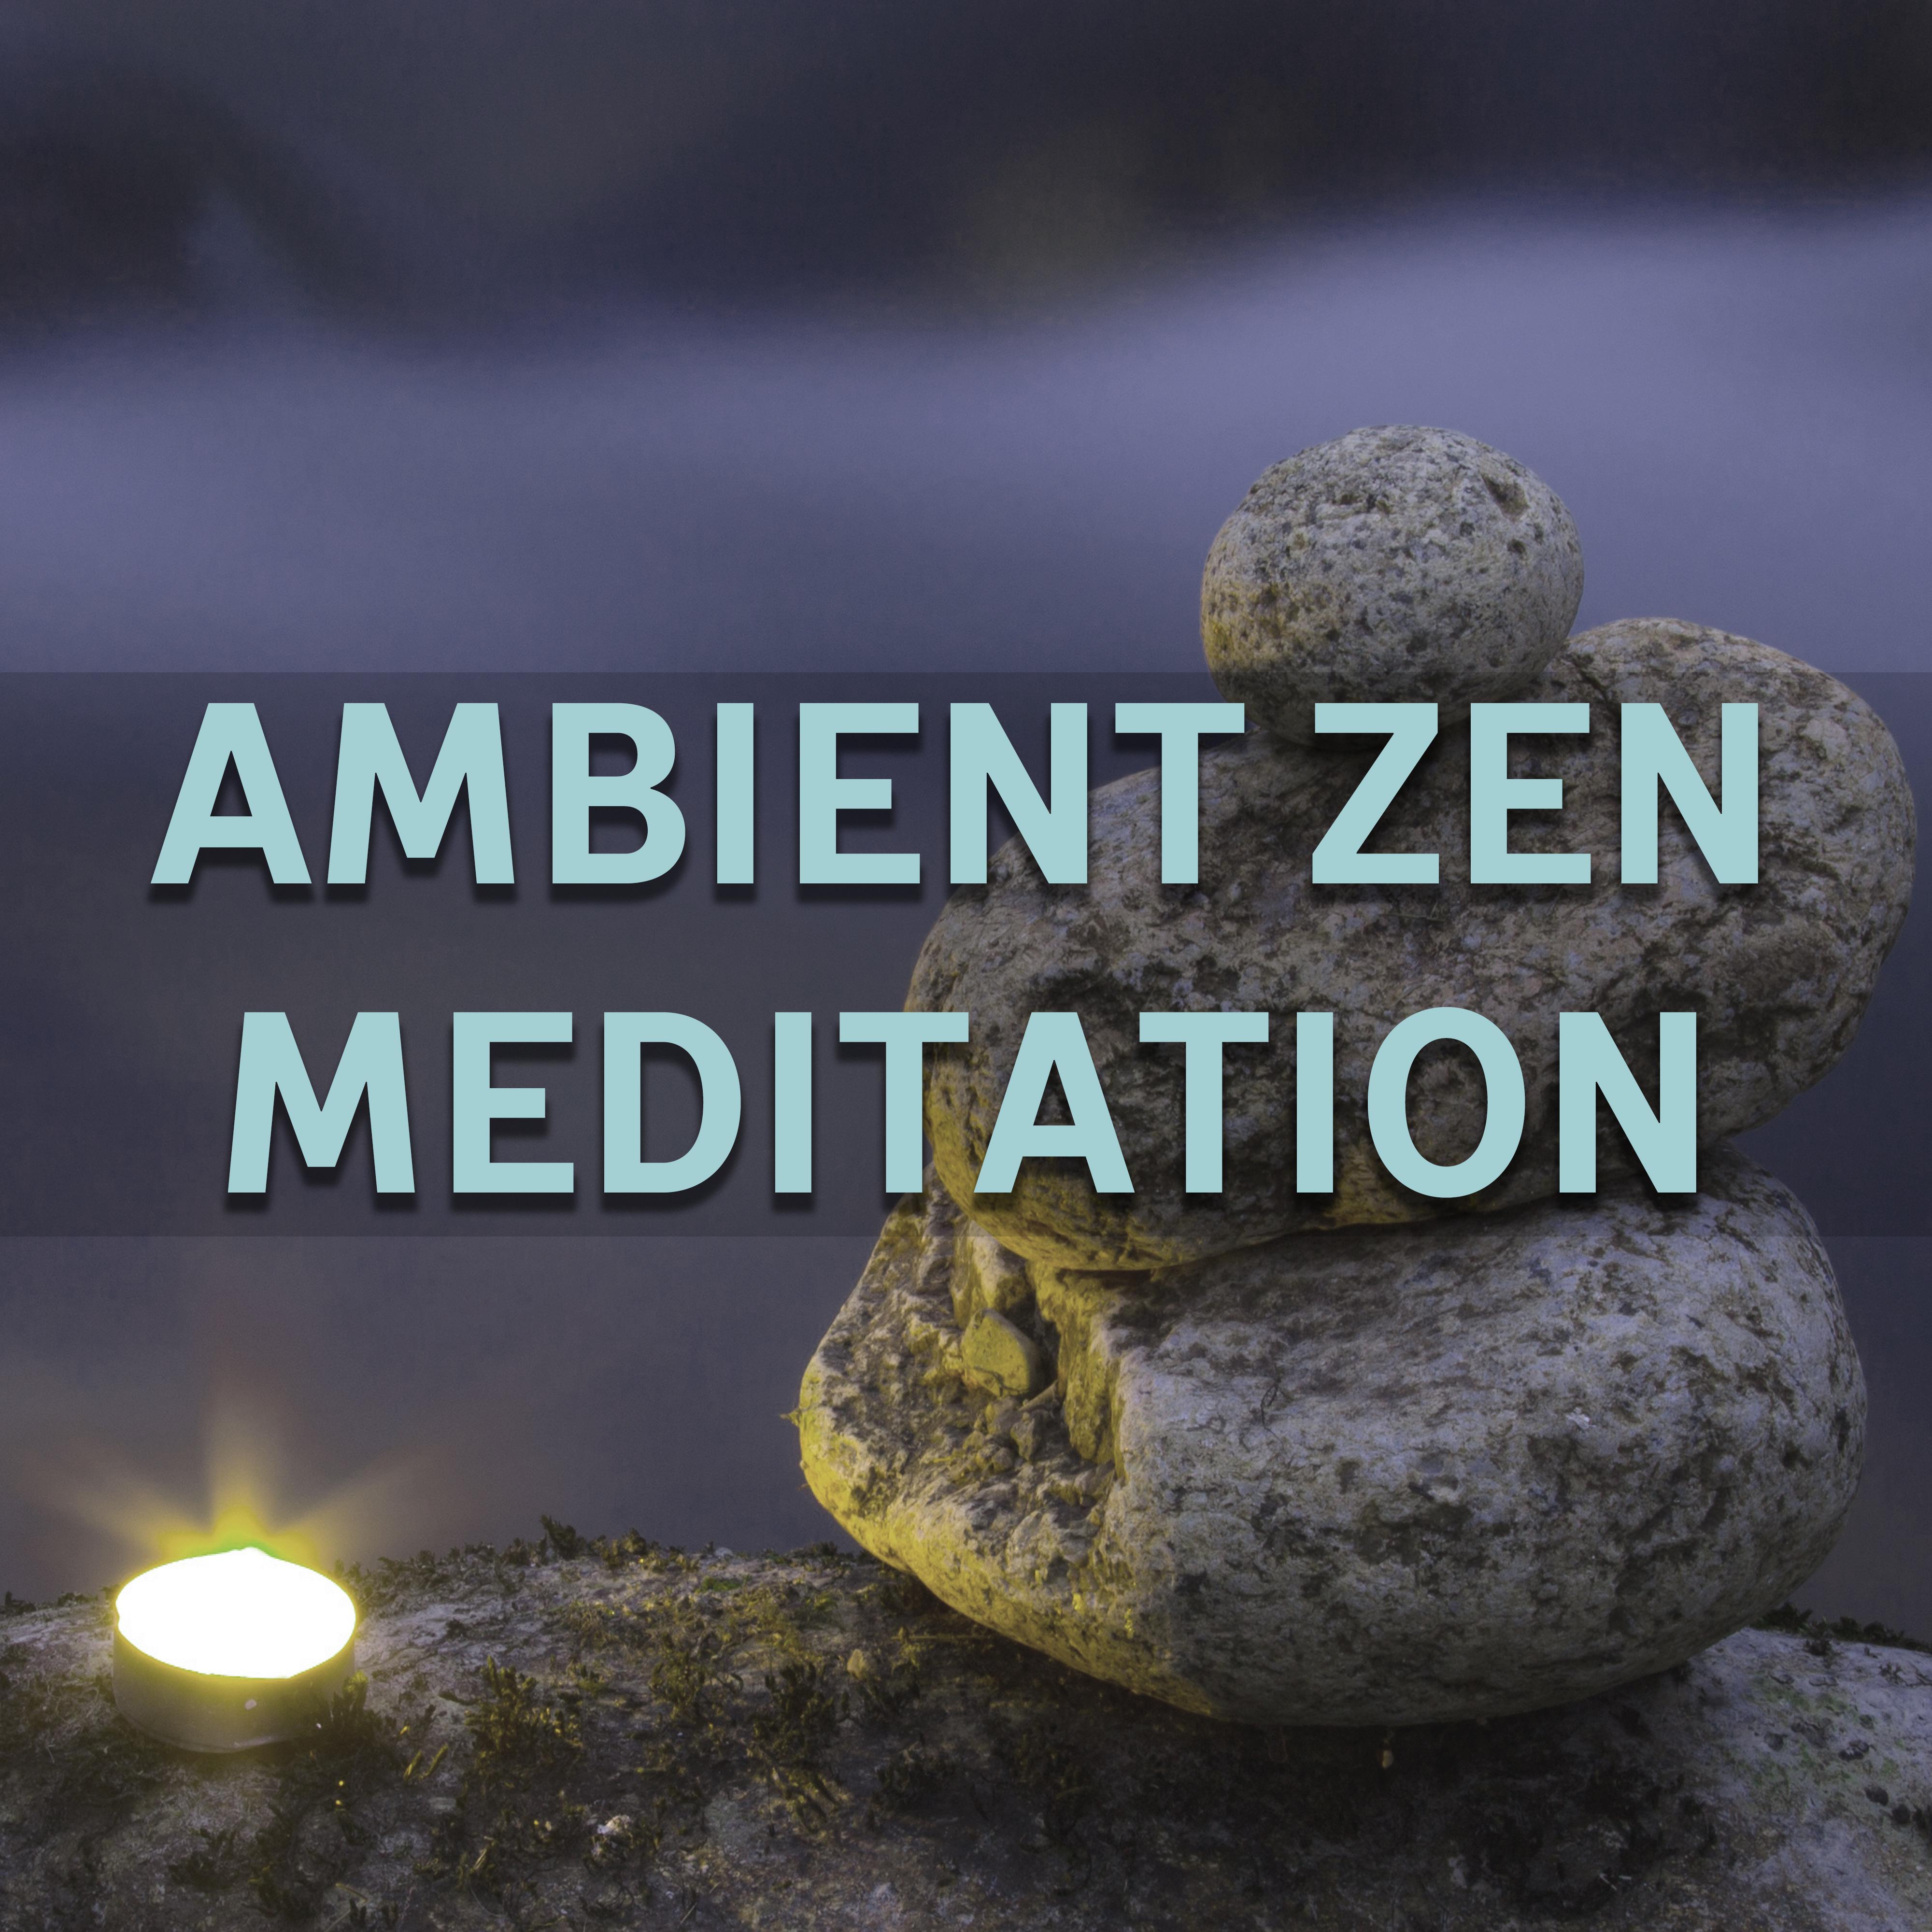 Ambient Zen Meditation  New Age Music, Pure Relaxation, New Age, Relax, Rest After Work, Meditation, Yoga at Home